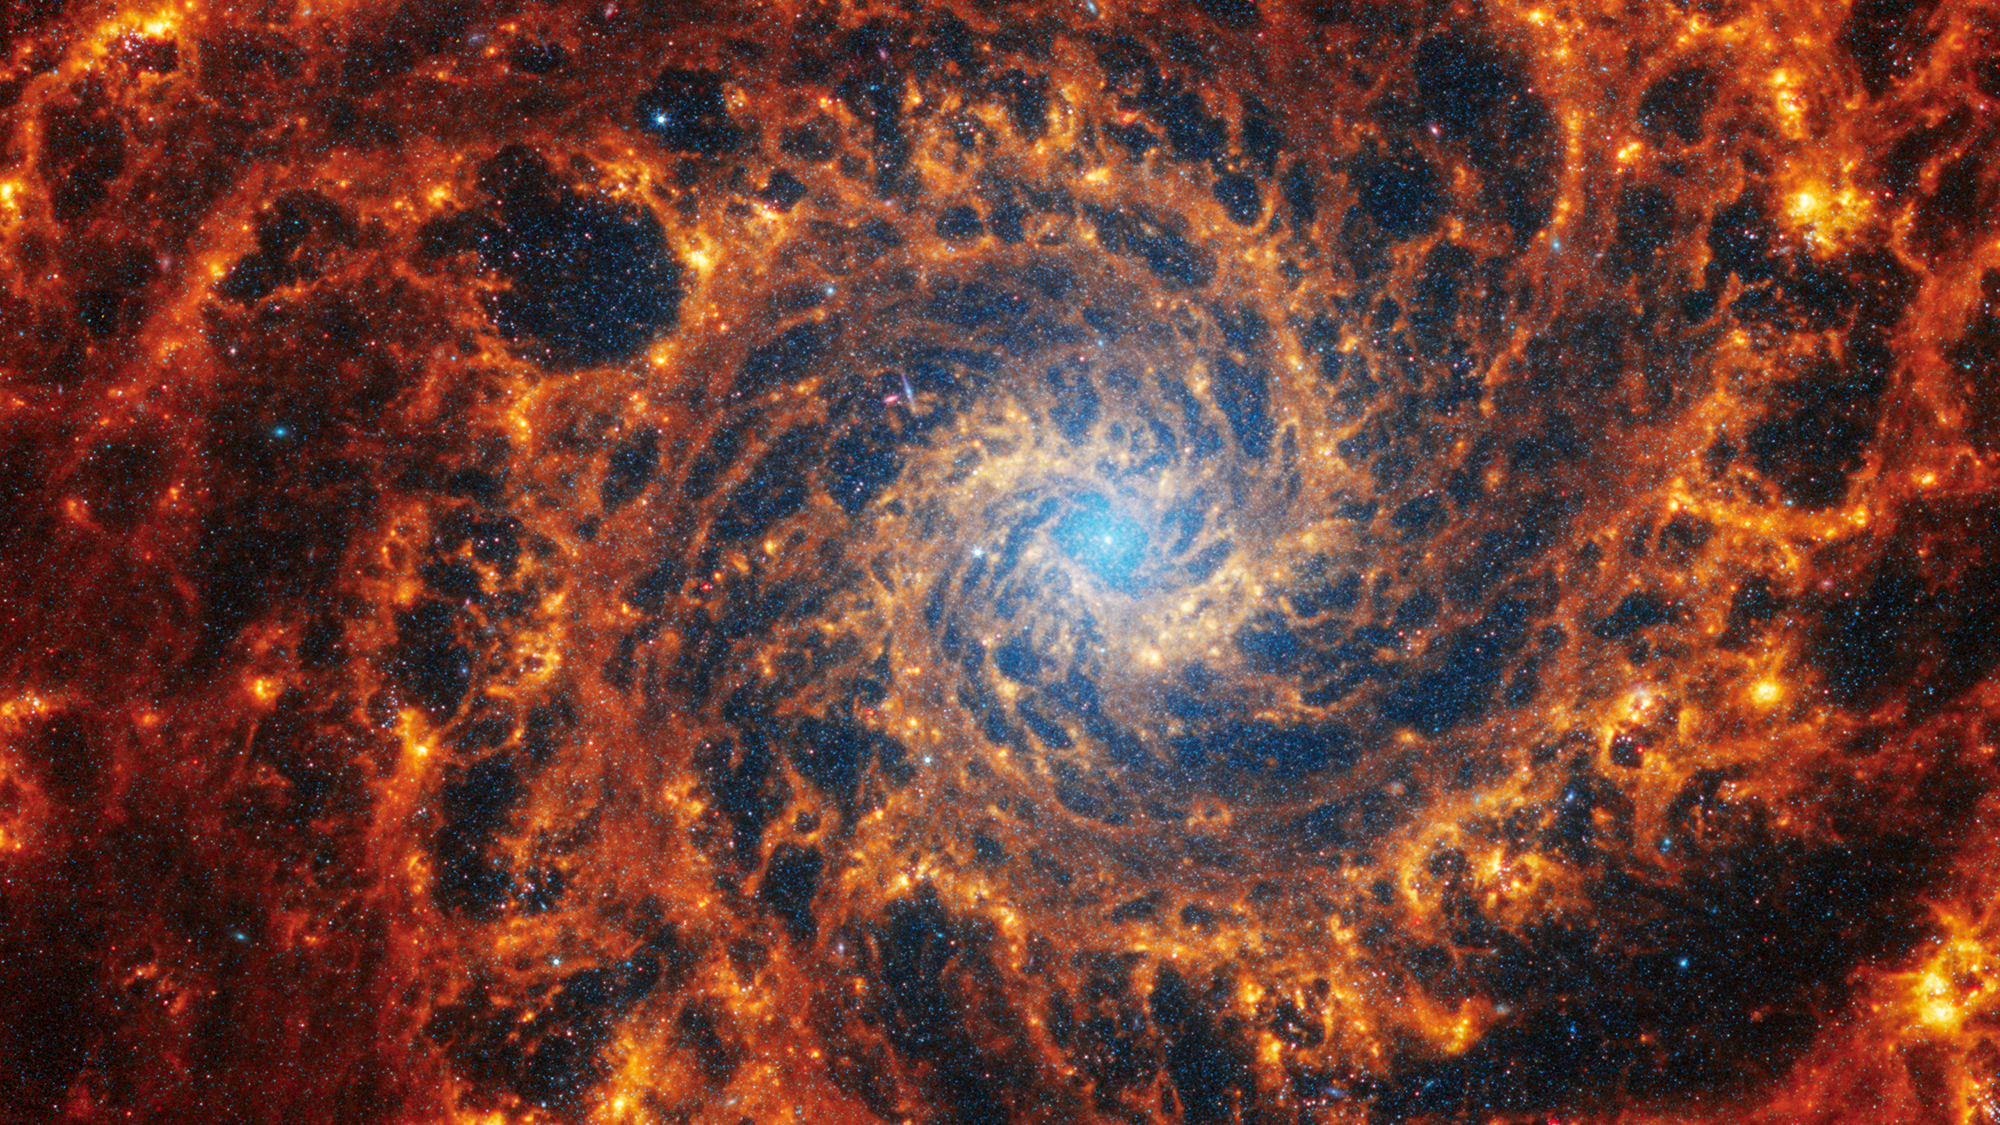 Face-on spiral galaxy, NGC 628, is split diagonally in this image: The James Webb Space Telescope’s observations appear at top left, and the Hubble Space Telescope’s on bottom right. JWST’s observations combine near- and mid-infrared light and Hubble’s showcase visible light. Dust absorbs ultraviolet and visible light, and then re-emits it in the infrared. In JWST’s images, we see dust glowing in infrared light. In Hubble’s images, dark regions are where starlight is absorbed by dust.